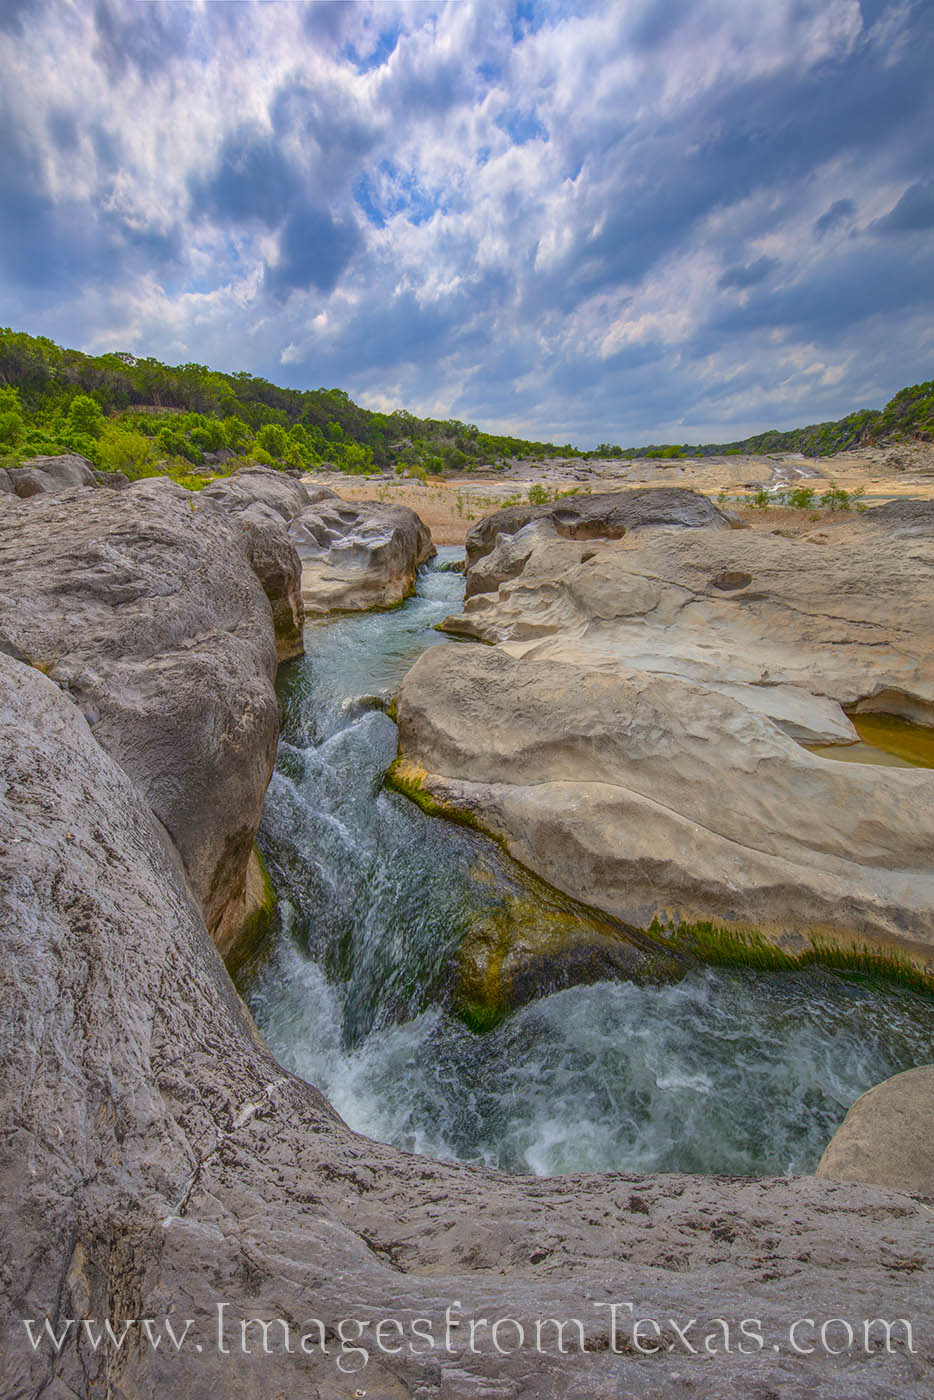 One of my favorite bends in the river at Pedernales State Park, this portion of the rocky terrain makes for great viewing and...